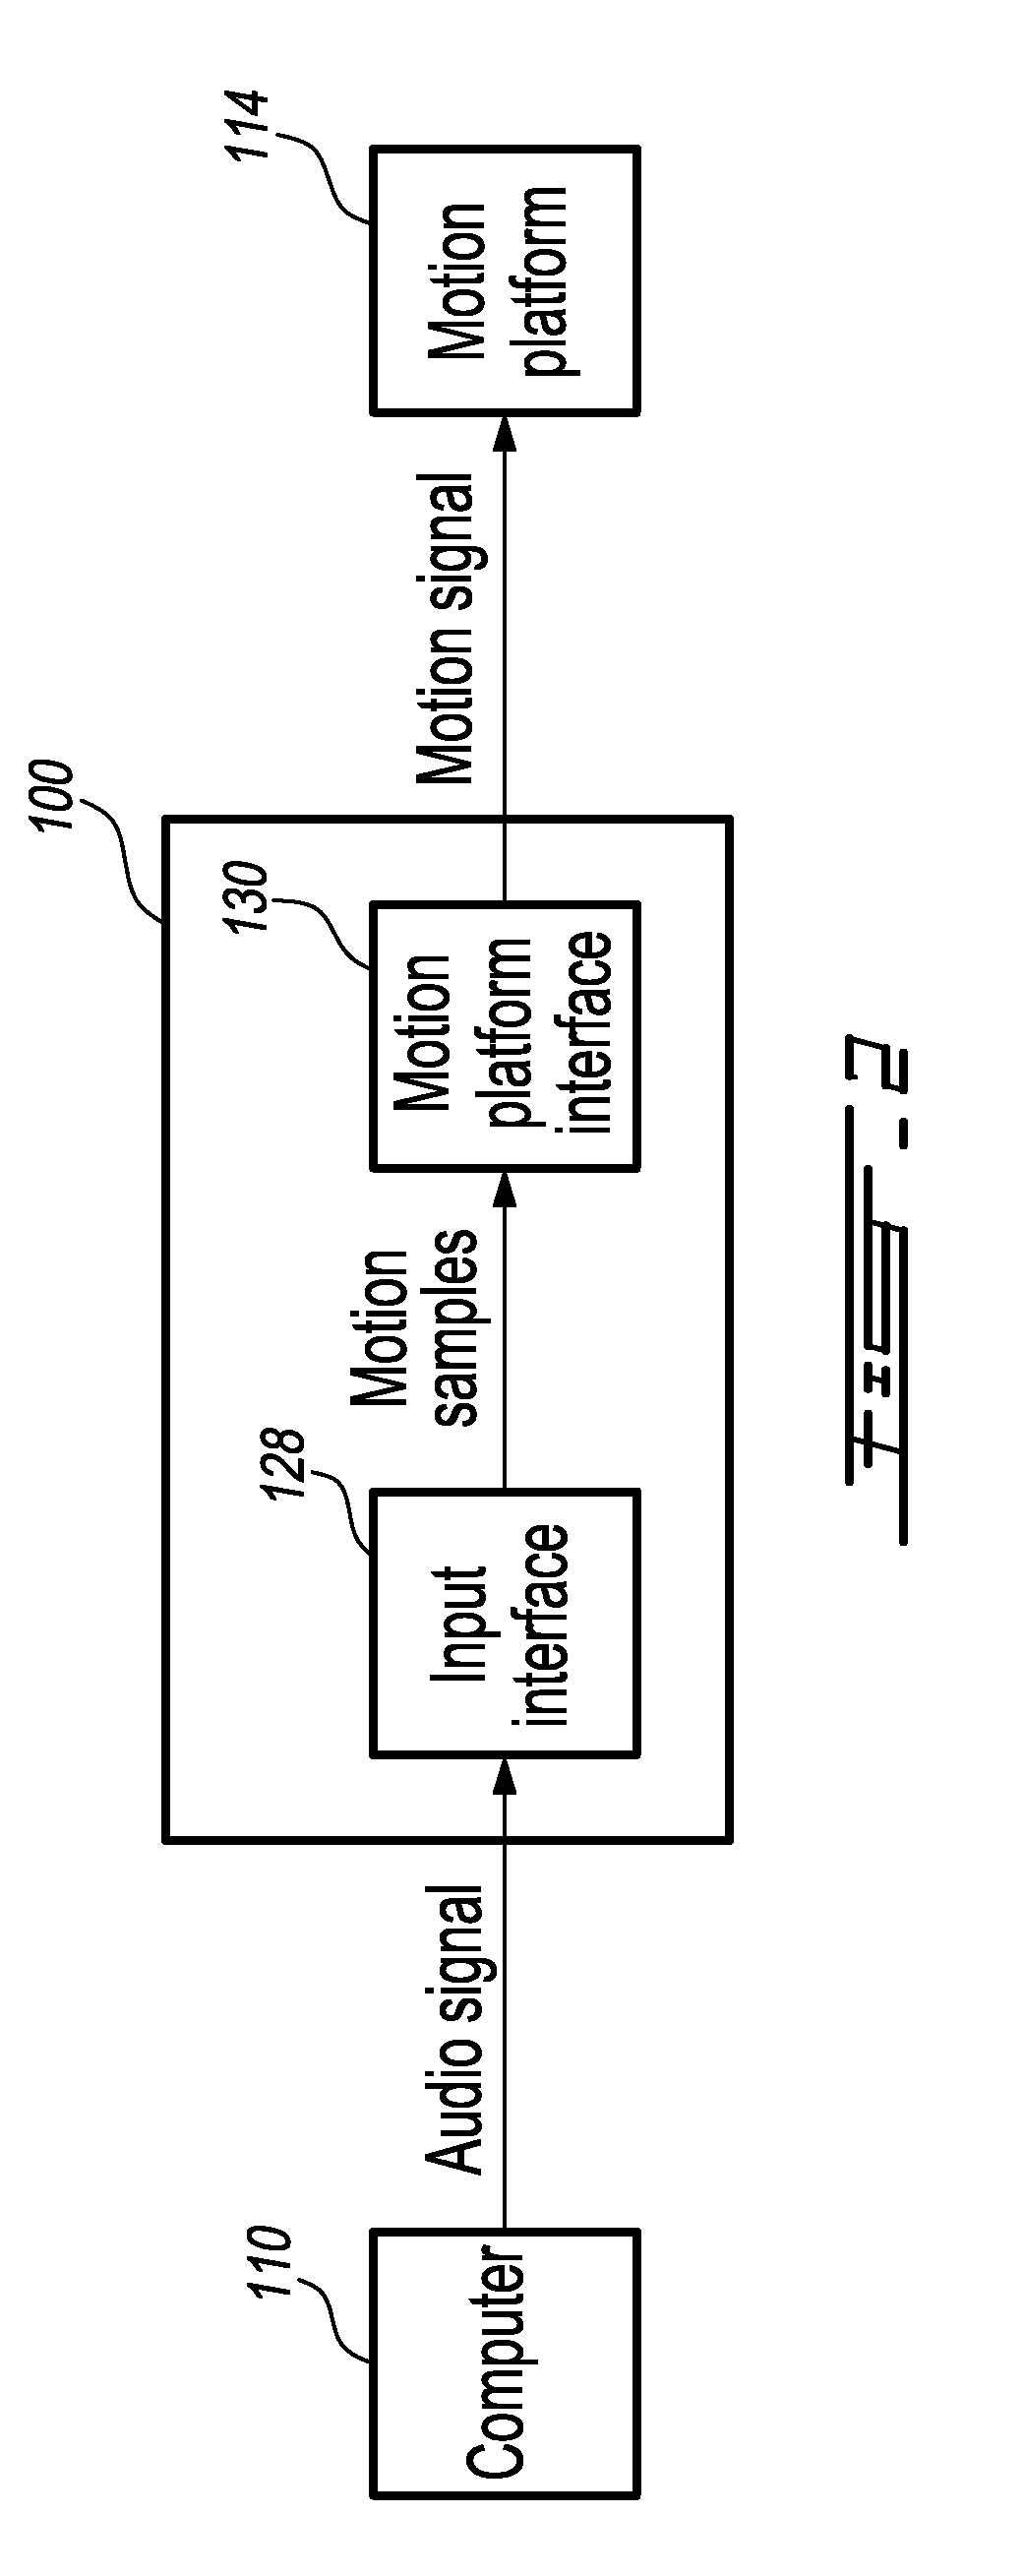 Audio interface for controlling a motion platform